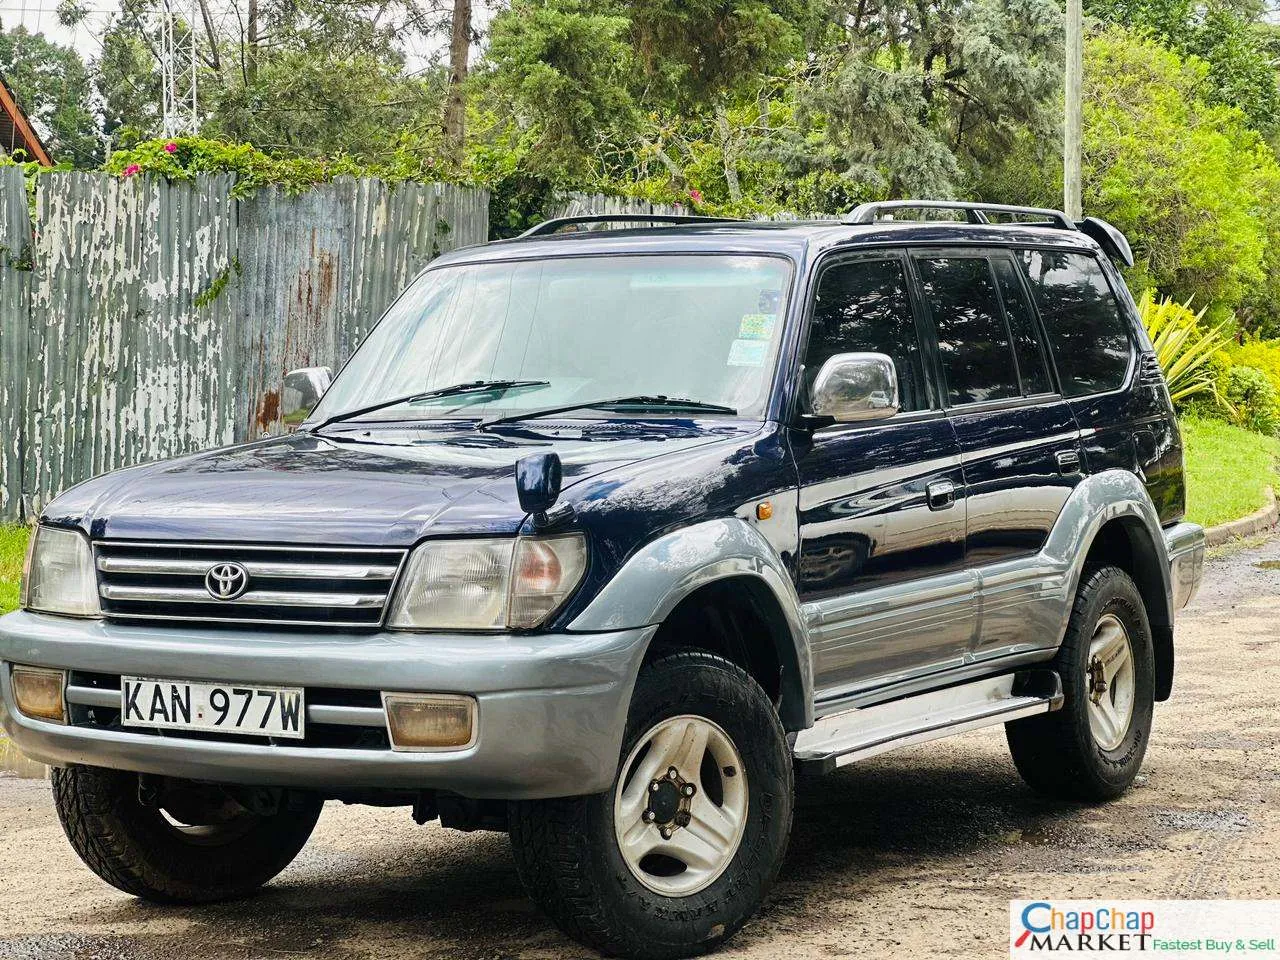 Toyota Prado 95 sunroof leather Toyota Prado for sale in kenya hire purchase installments You Pay 30% Deposit Trade in OK EXCLUSIVE